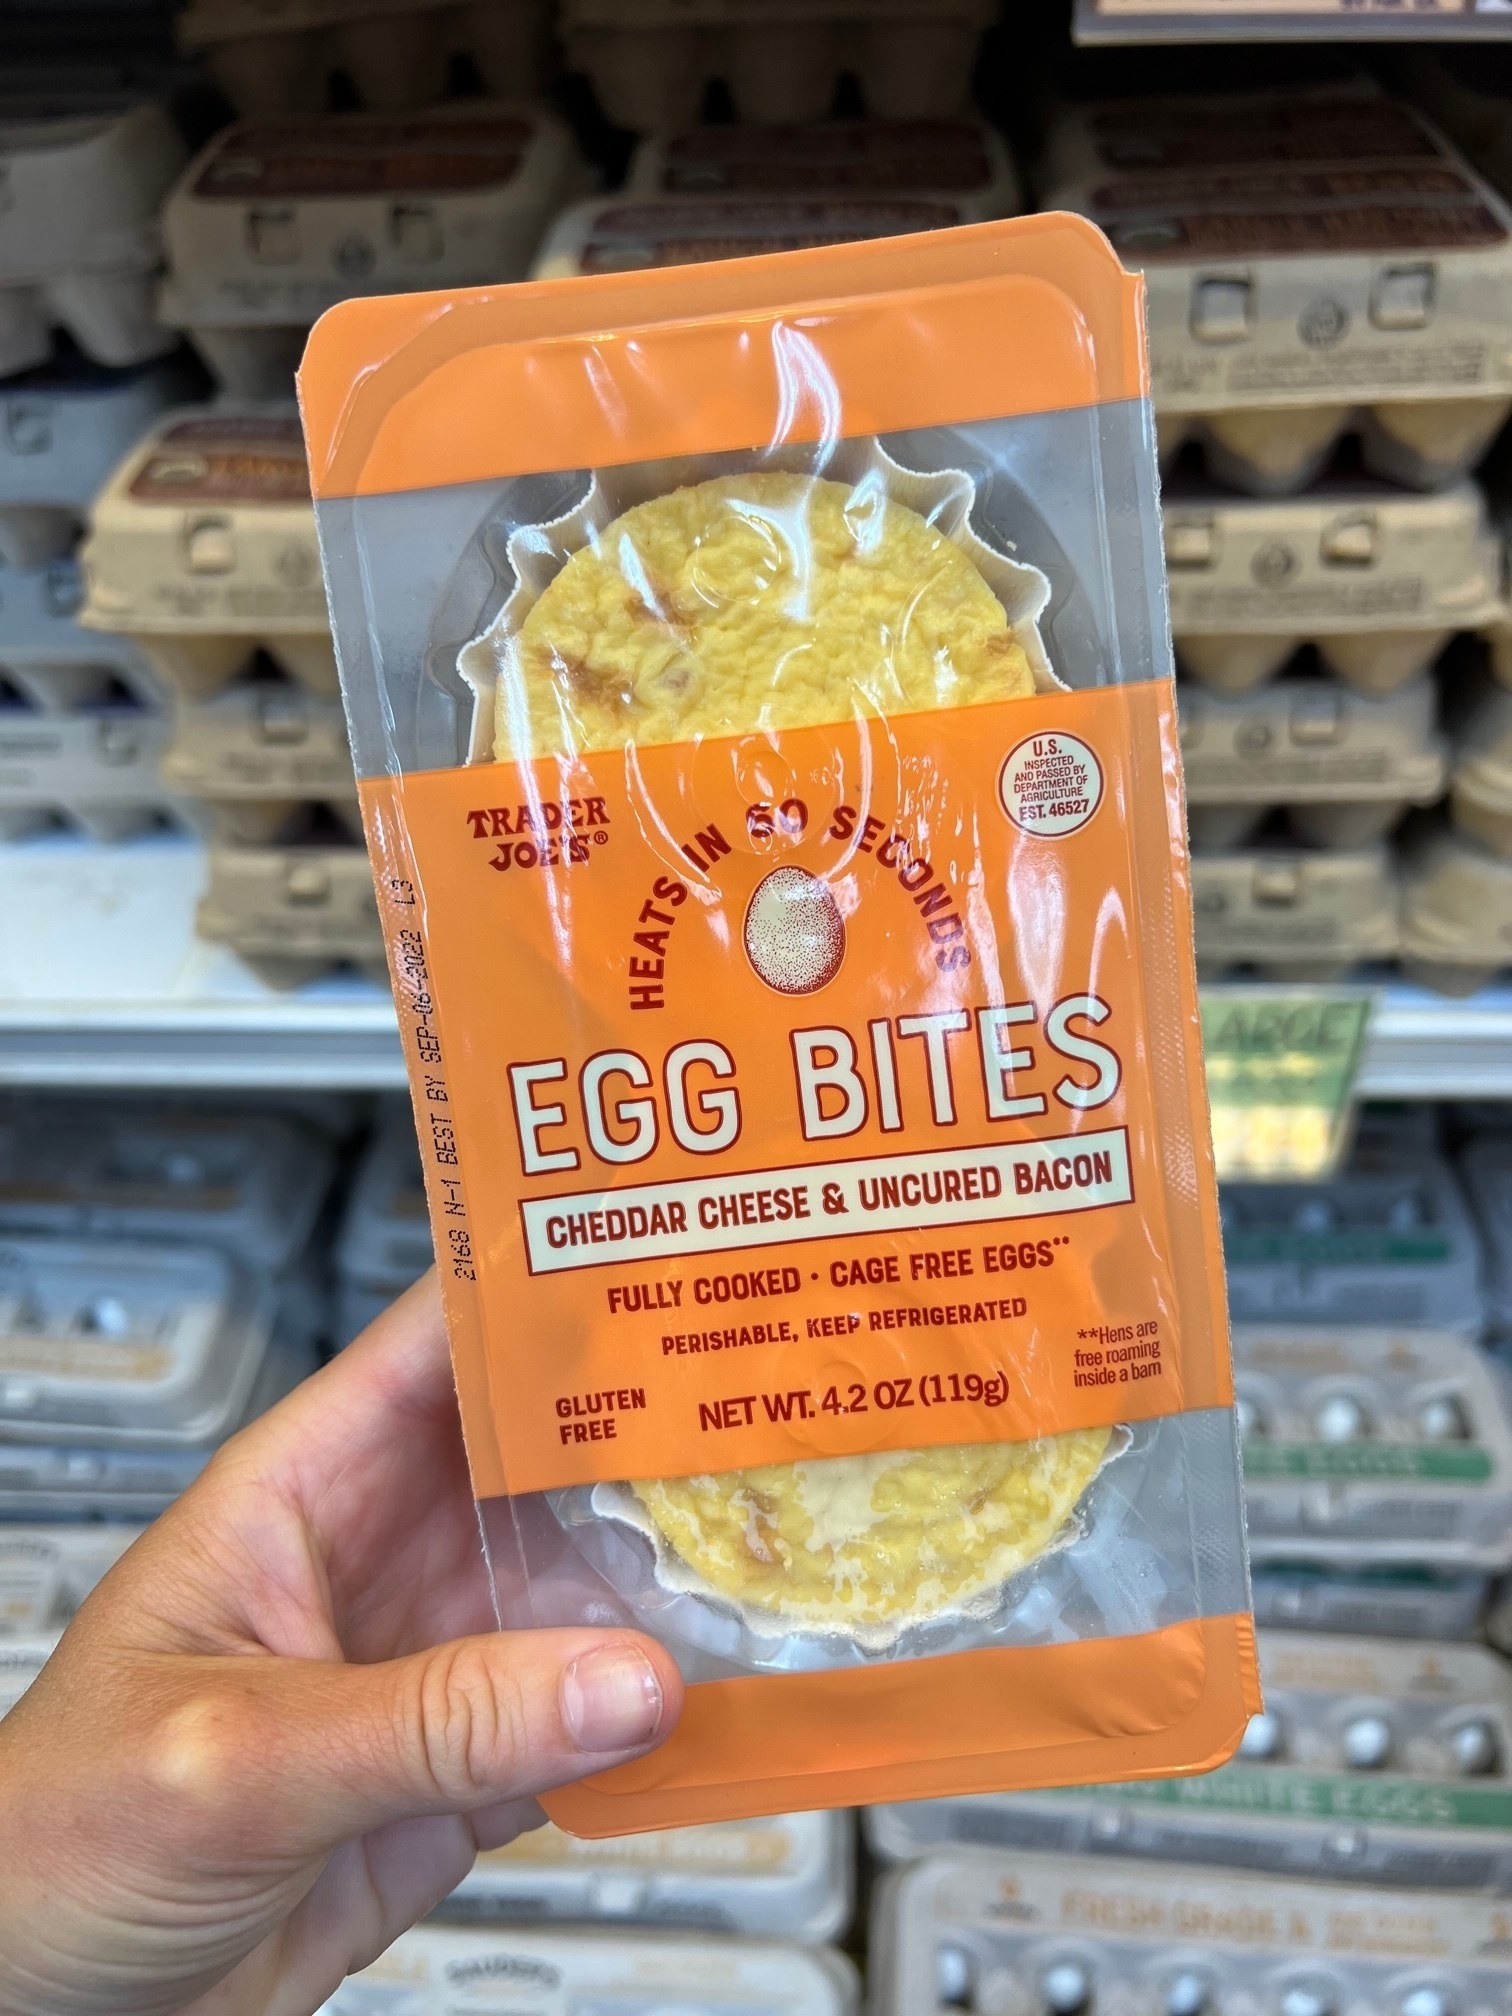 A hand holding packaged egg bites